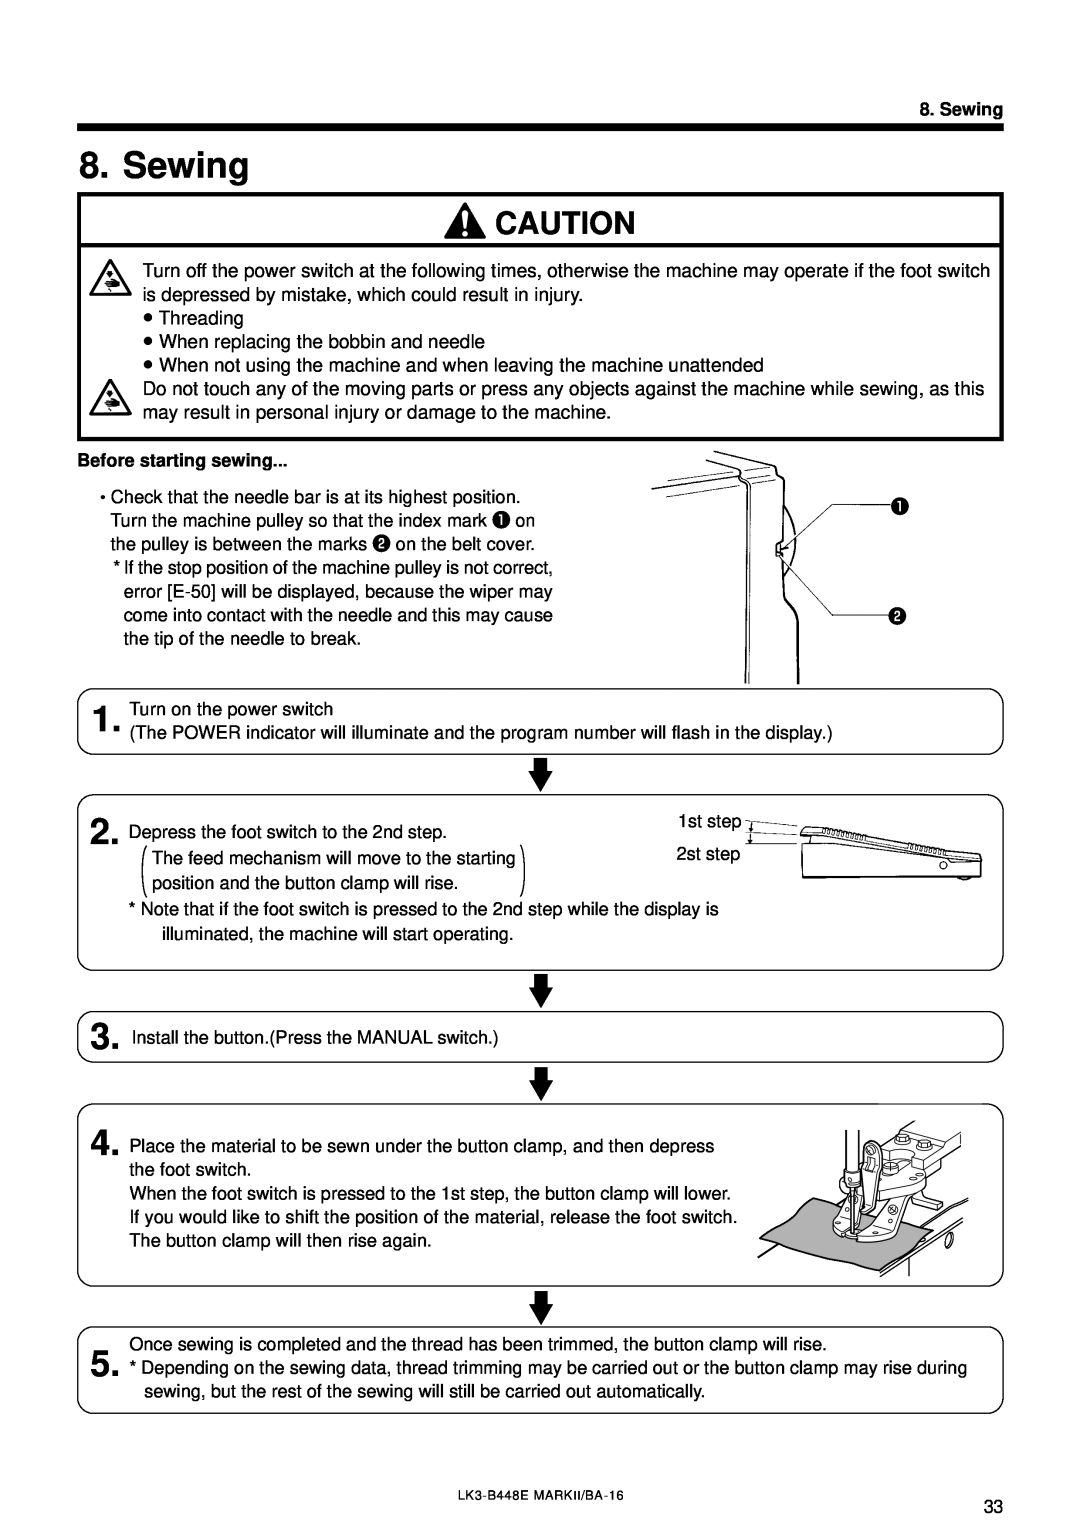 Brother LK3-B448E instruction manual Sewing, Threading When replacing the bobbin and needle, Before starting sewing 